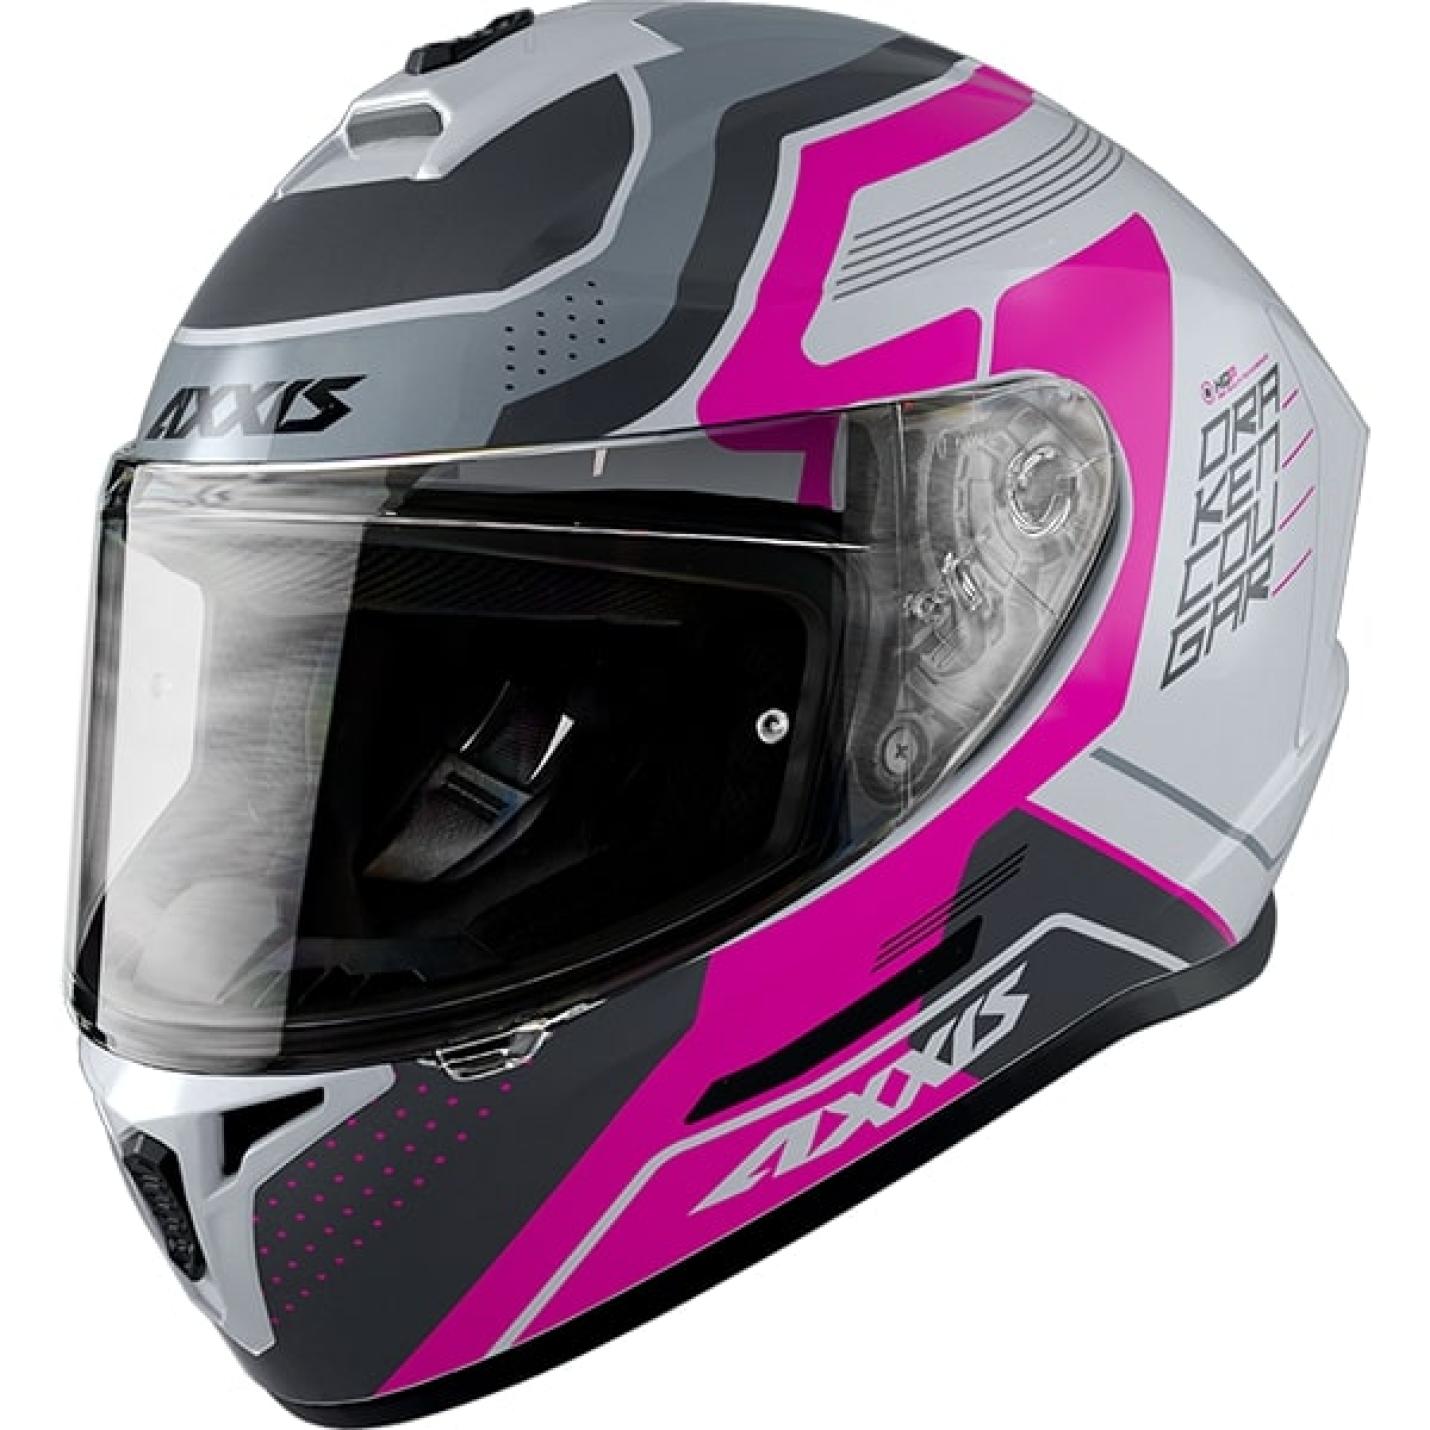 Helm Axxis Draken Cougar Fluor Roze XS AE-trading